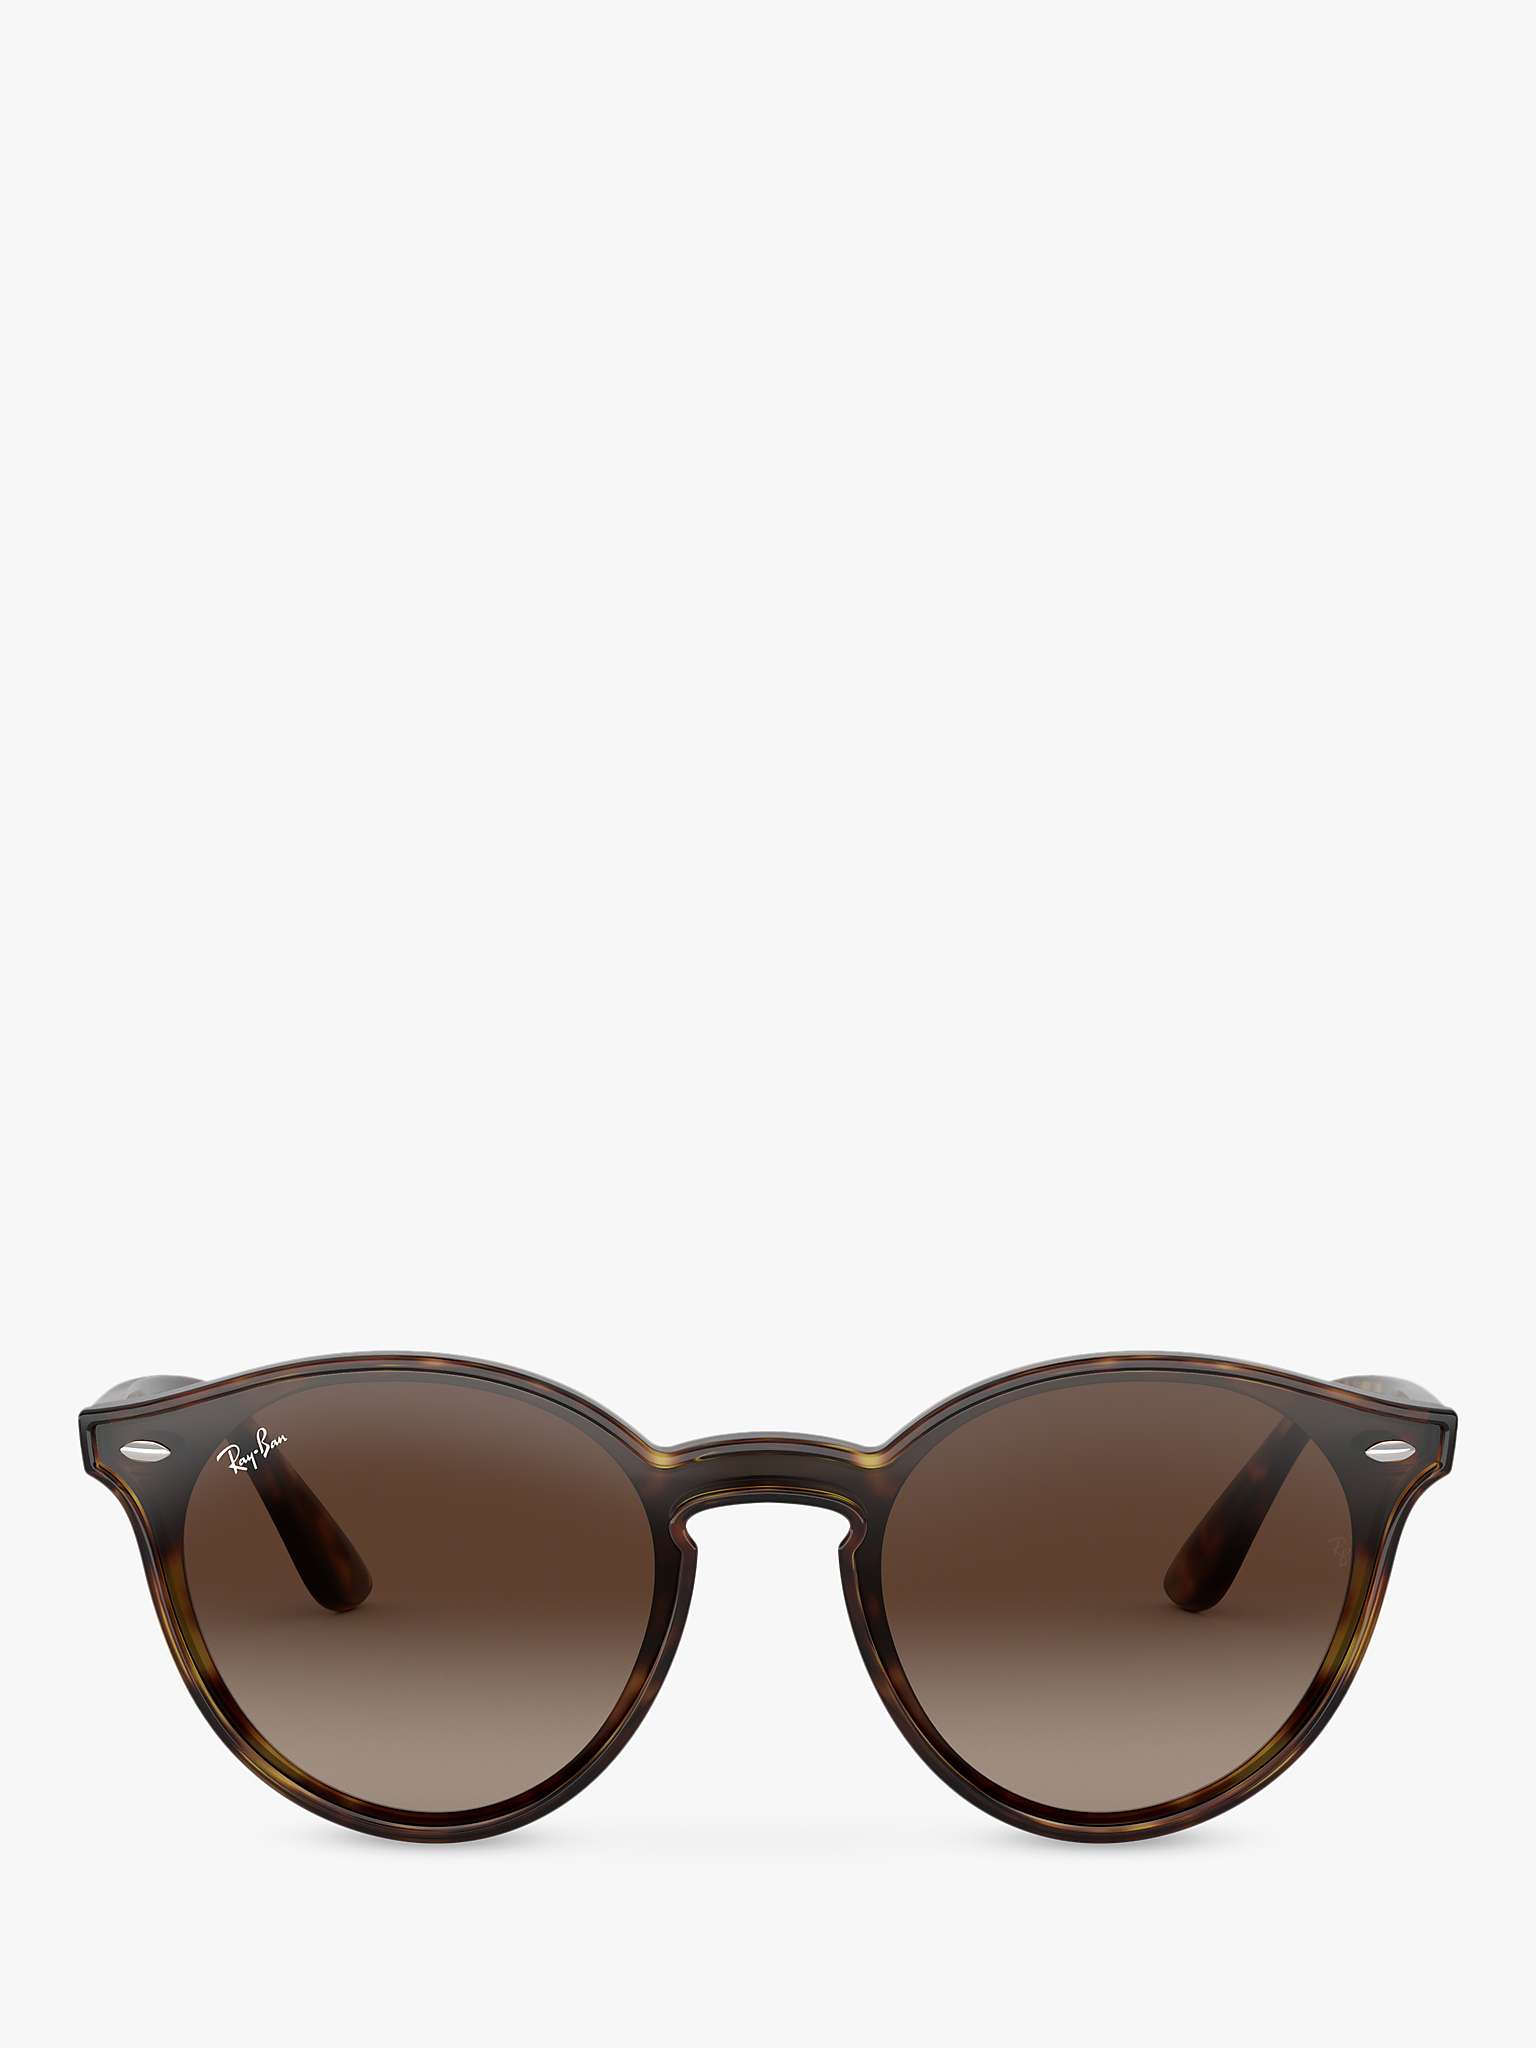 Buy Ray-Ban RB4380N Unisex Oval Sunglasses Online at johnlewis.com